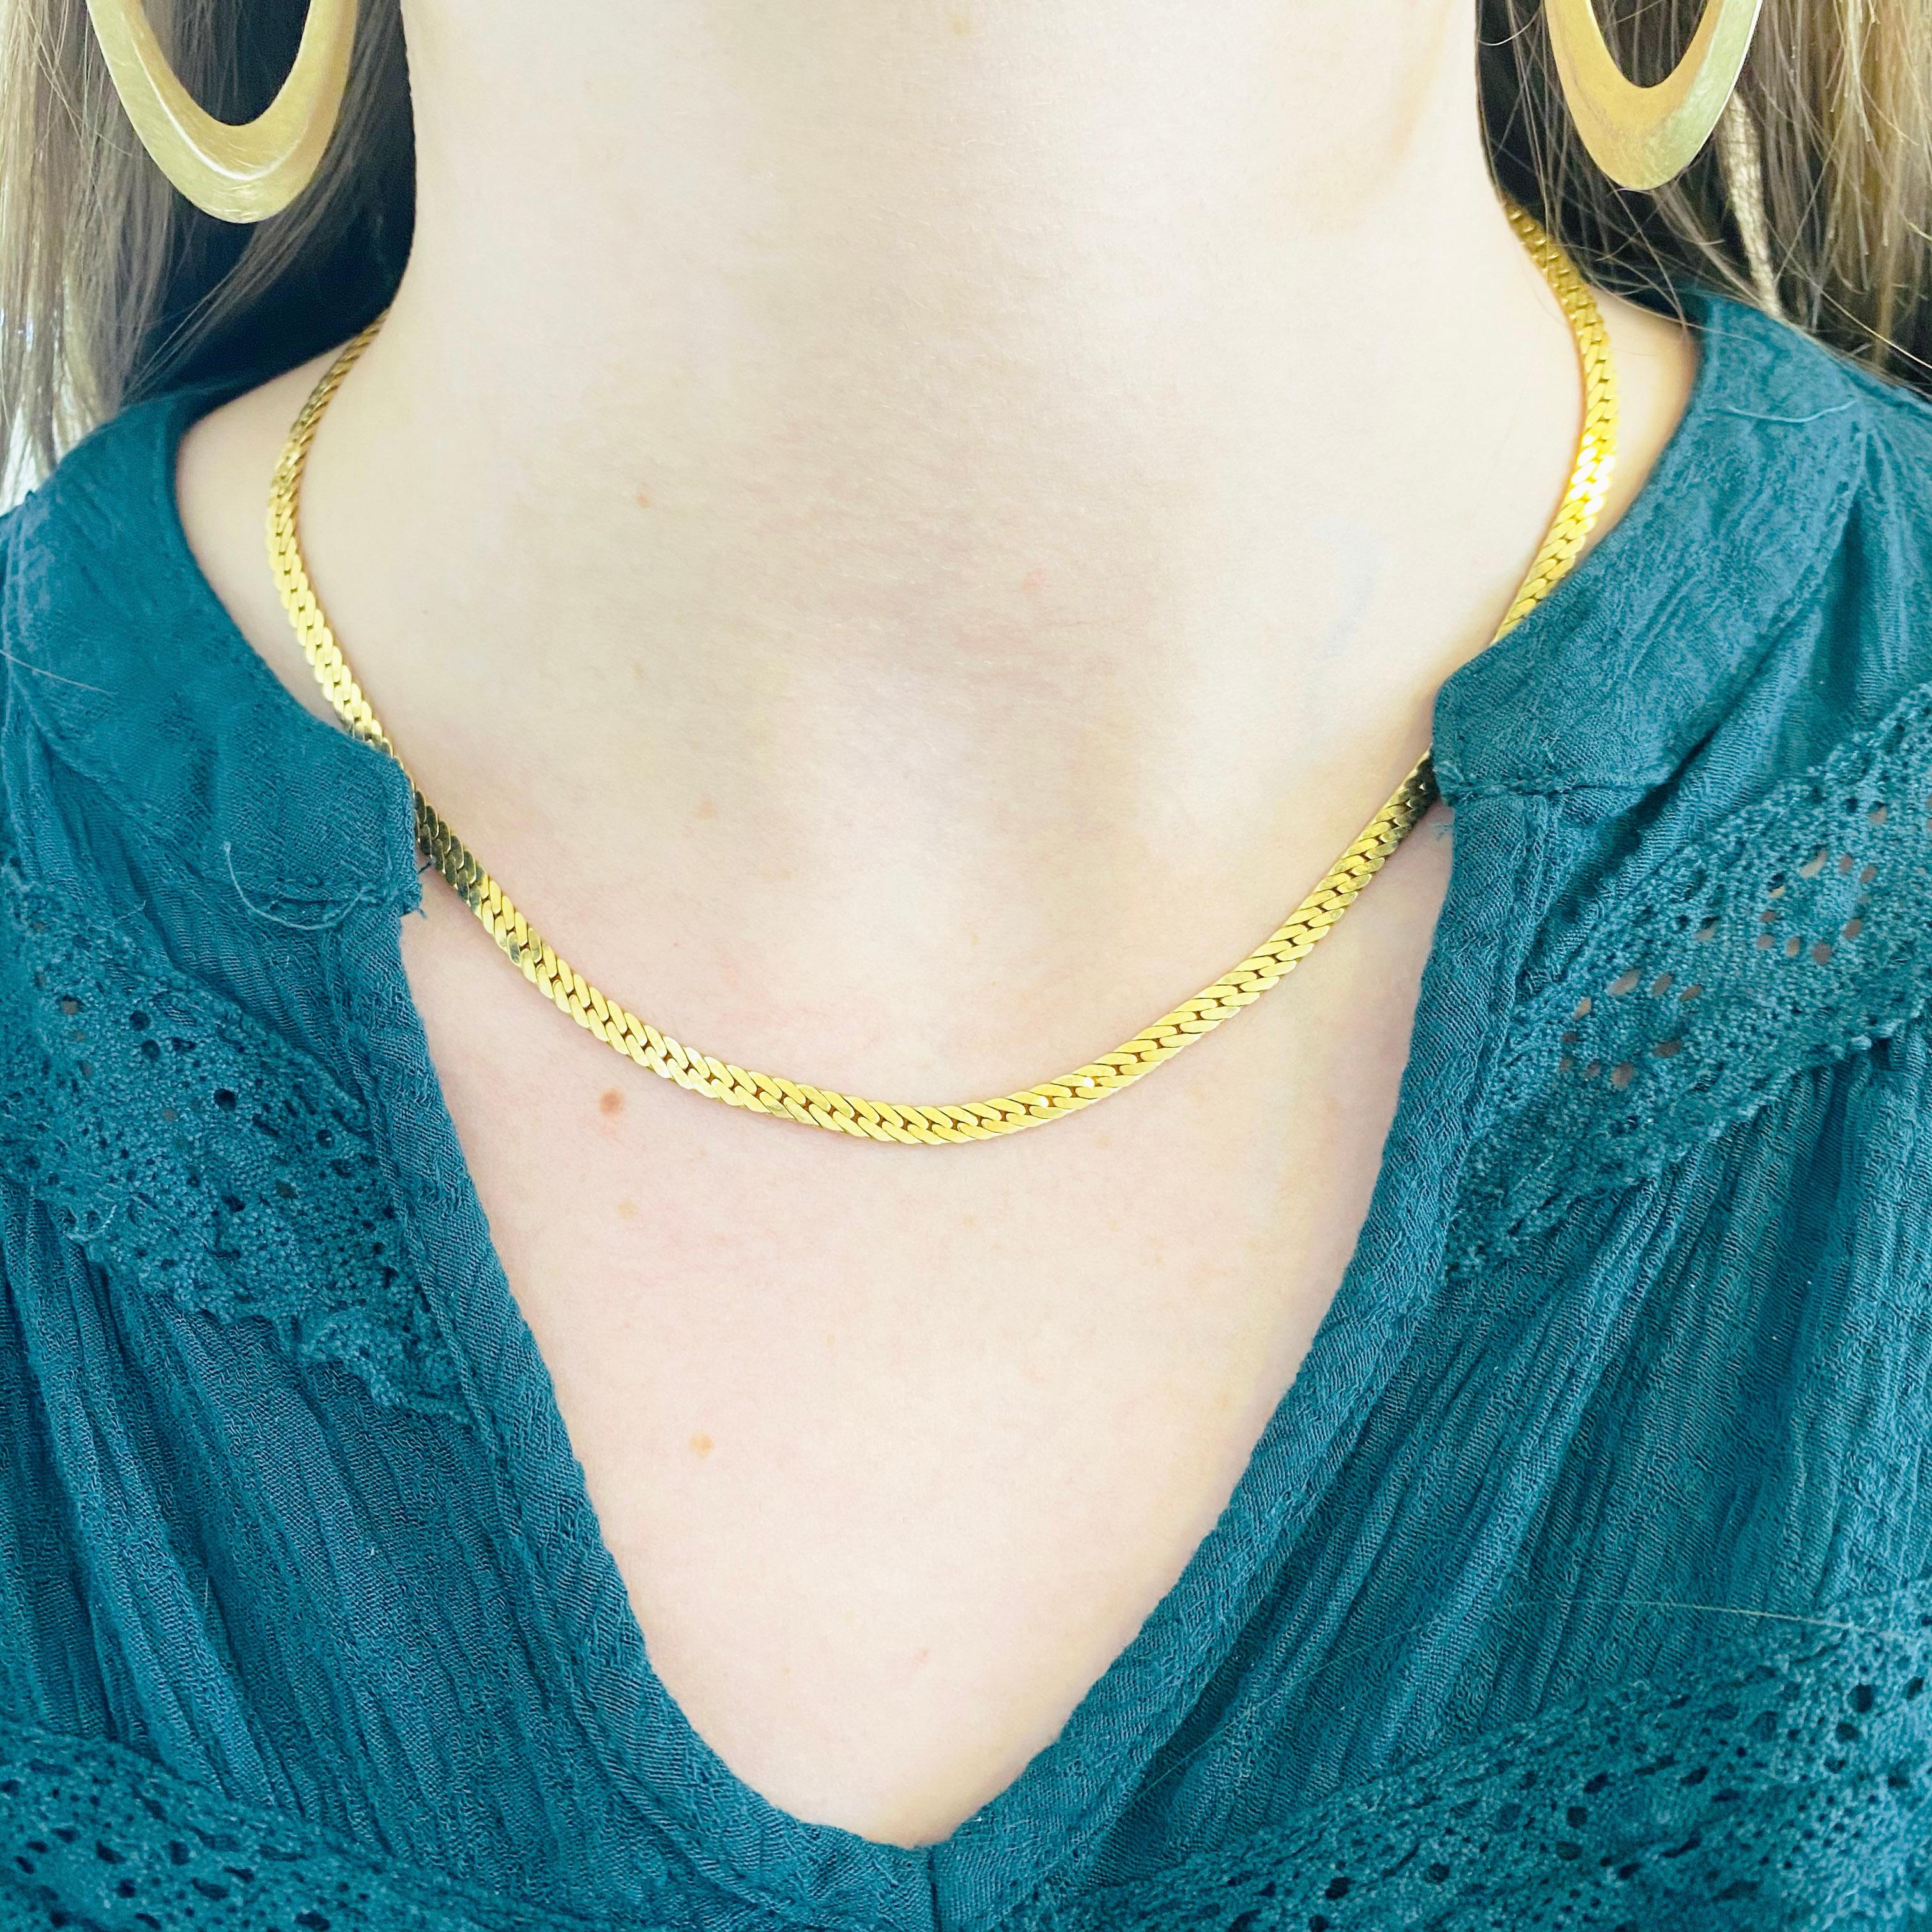 The herringbone chain, or flat gold chain style, which dates back to ancient Egyptian times, is a sophisticated design. It gets its name from the herringbone fish, a fish  known for their many parallel and slanted bones and this herringbone chain is